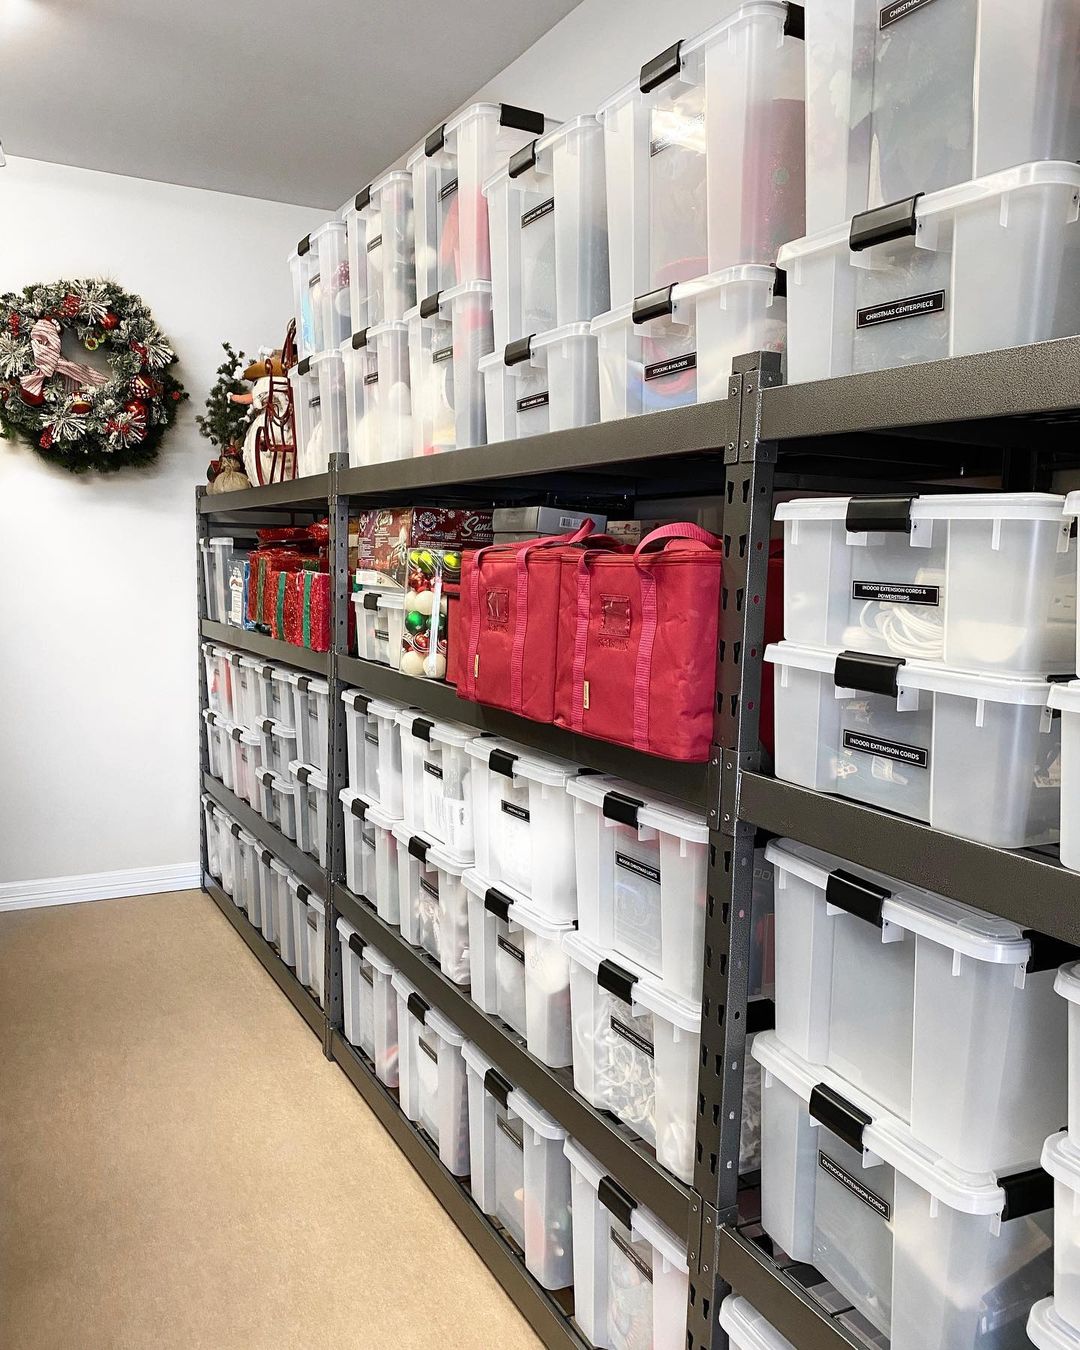 My Best Tips to Declutter Your Storage Room